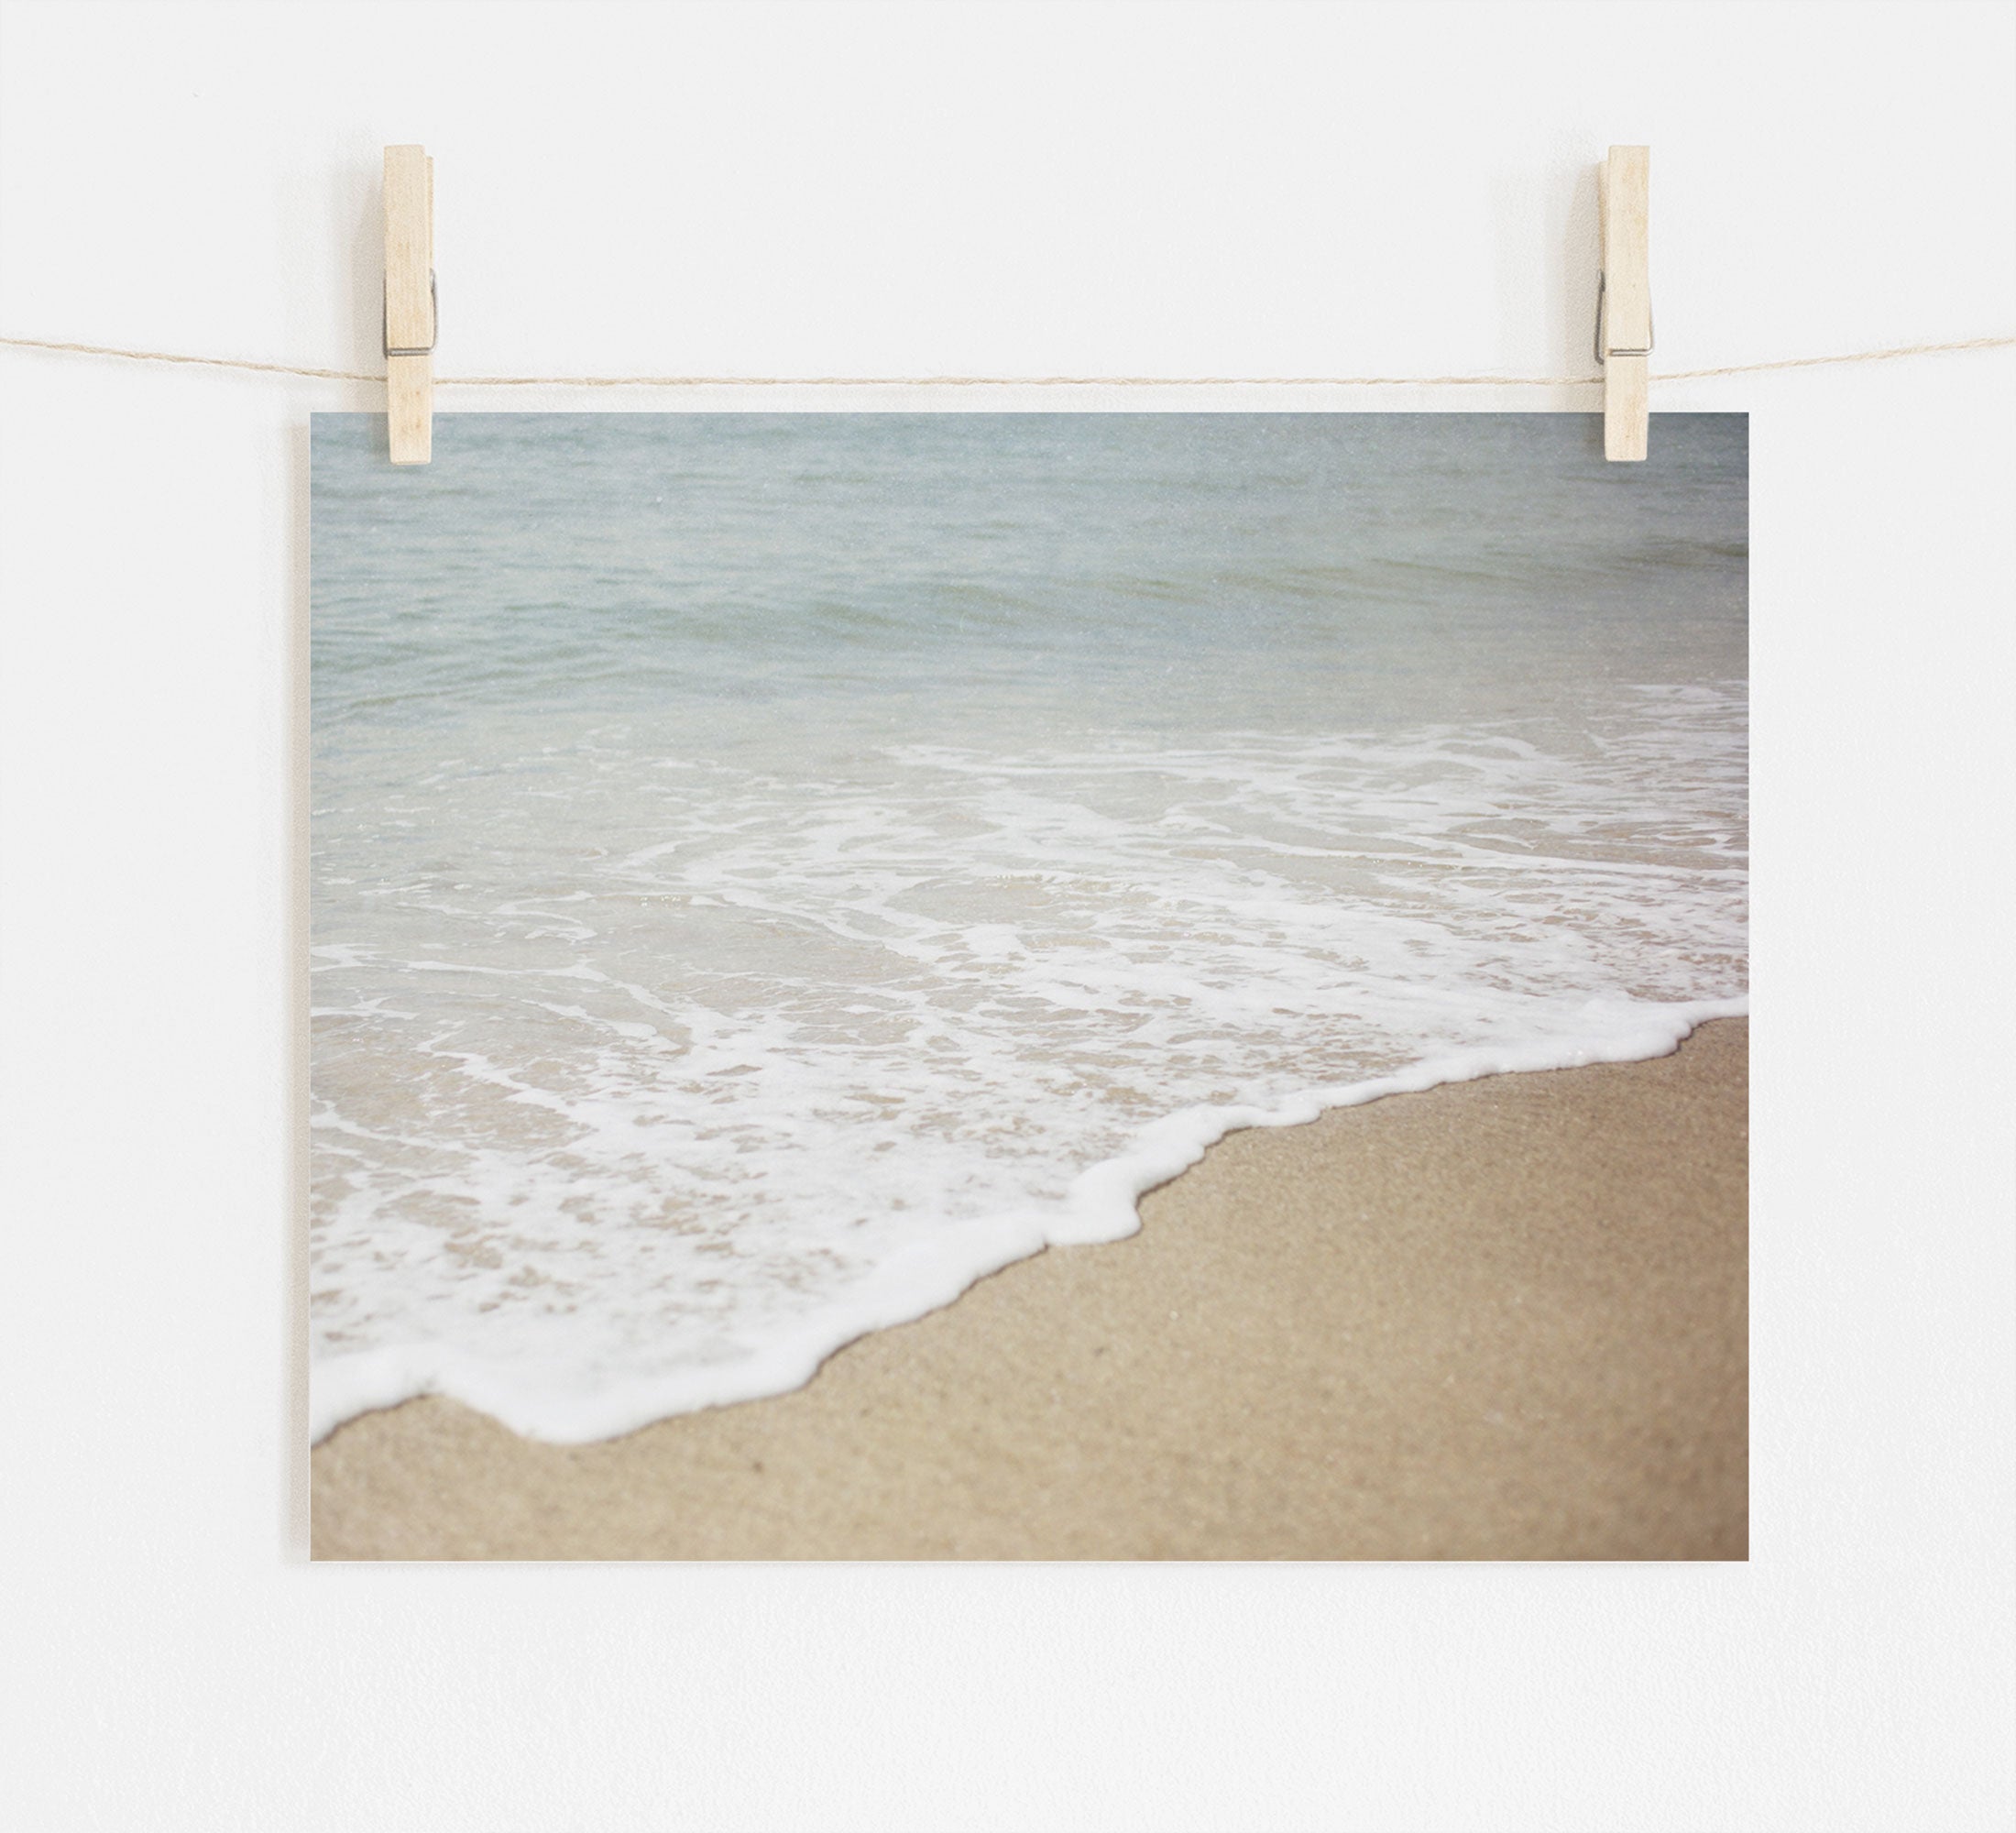 A photograph of a Beach Waves Print, &#39;Chasing Surf&#39; by Offley Green, printed on archival photographic paper and pinned up by two wooden clothespins on a string against a white background.